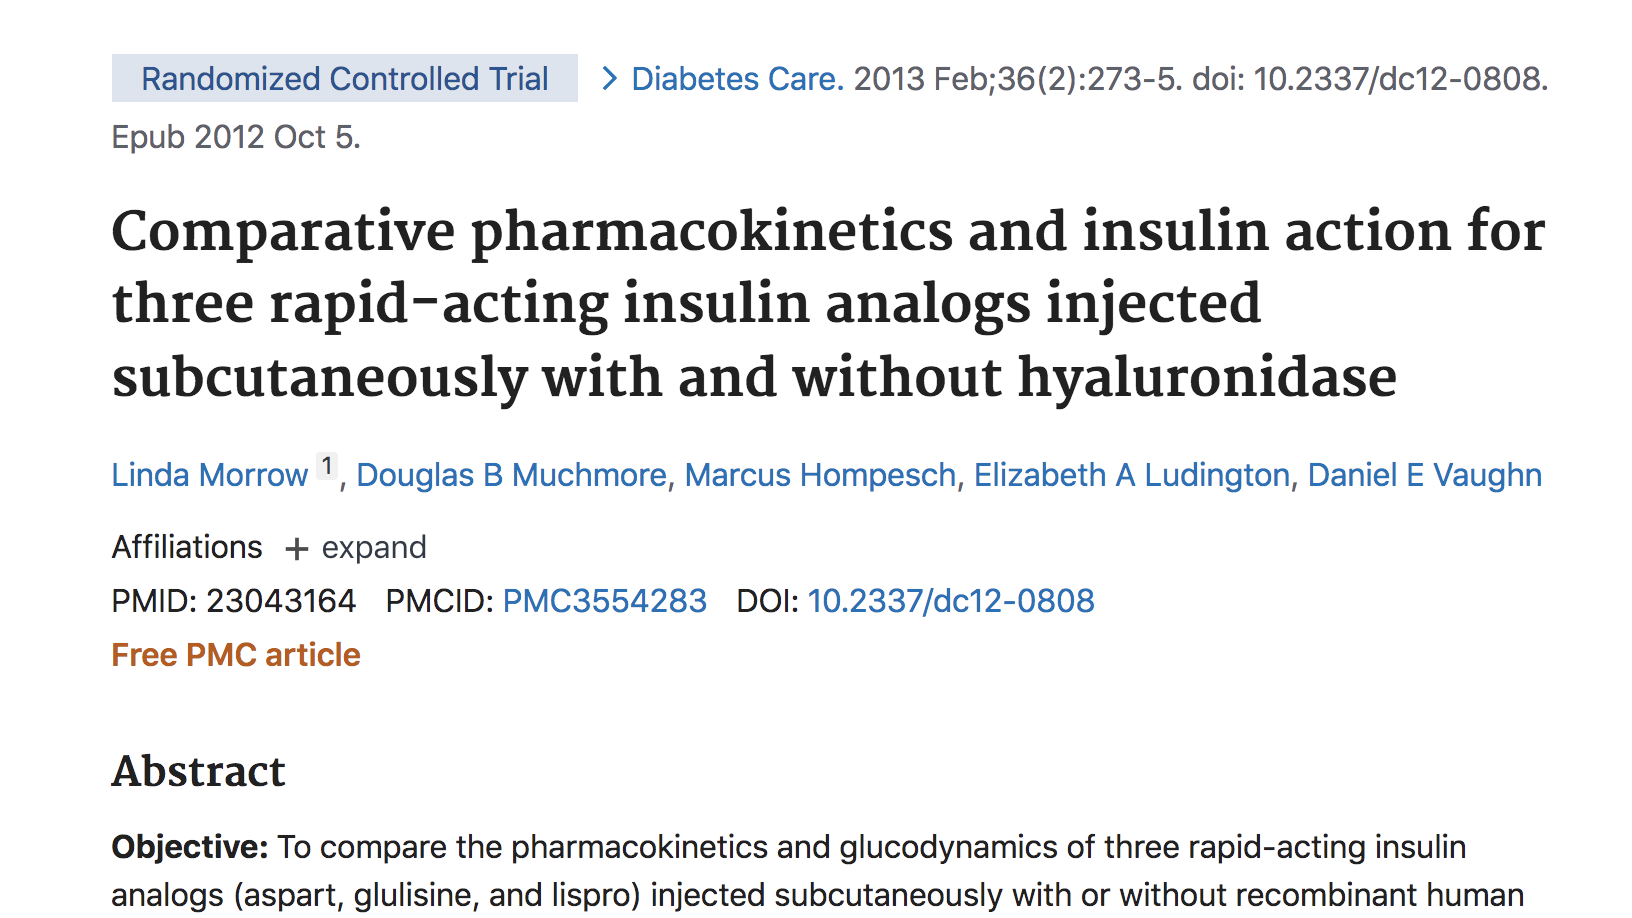 image of Comparative pharmacokinetics and insulin action for three rapid-acting insulin analogs injected subcutaneously with and without hyaluronidase.